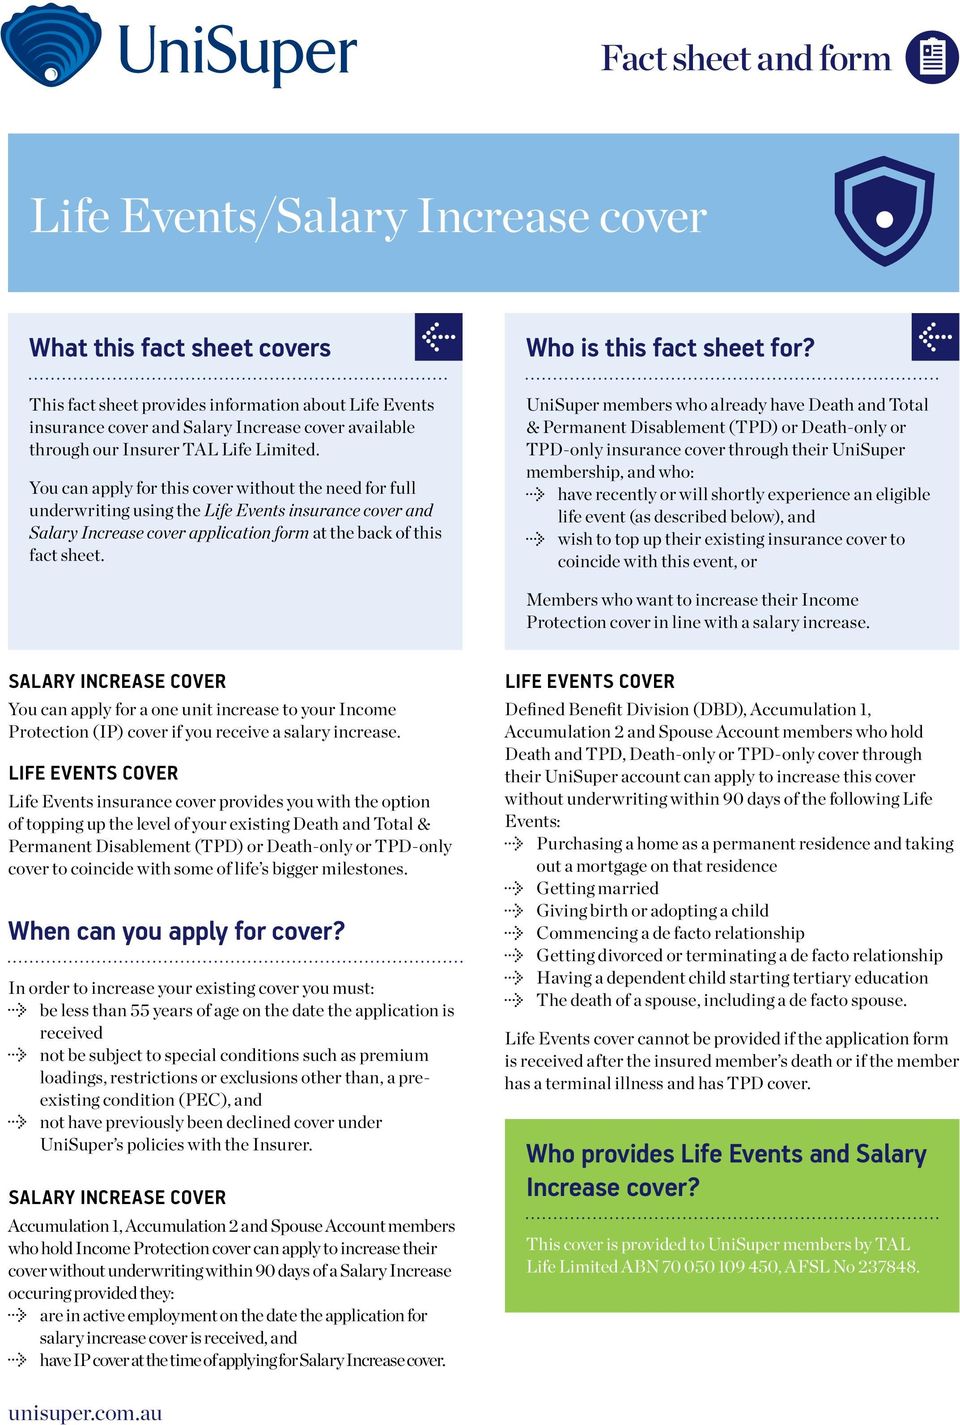 You can apply for this cover without the need for full underwriting using the Life Events insurance cover and Salary Increase cover application form at the back of this fact sheet.